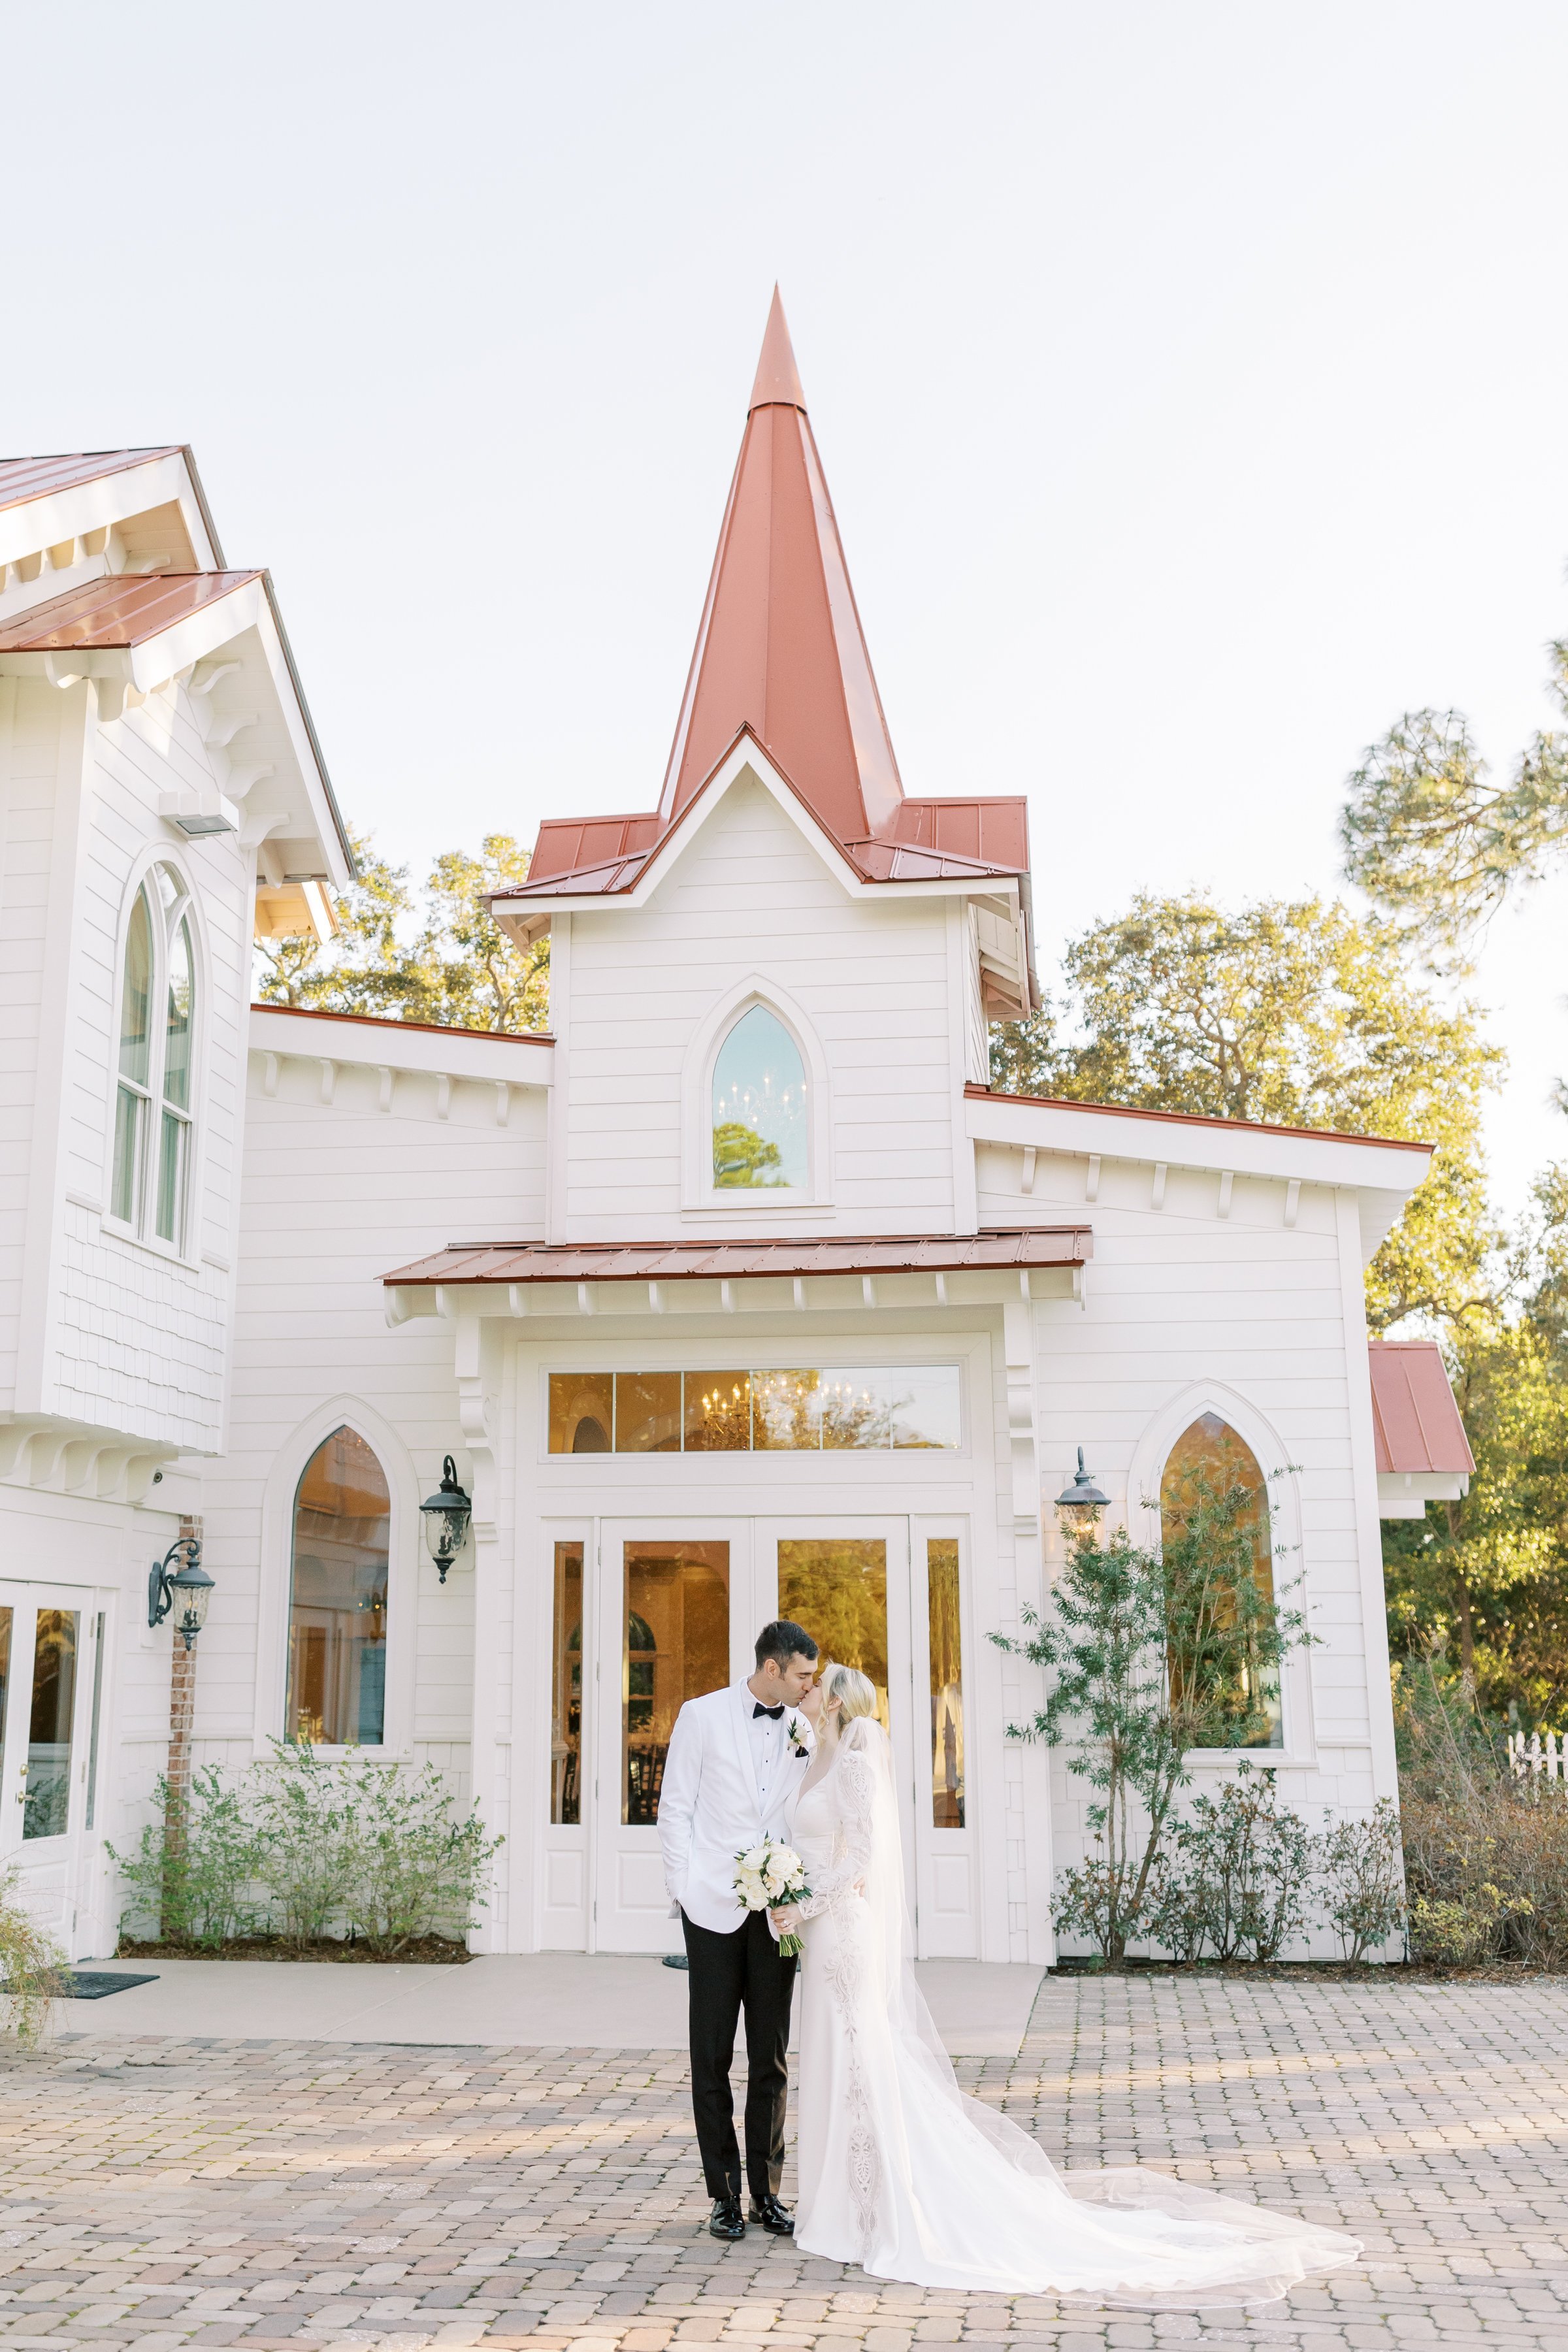 cheyenne-and-nicks-wedding-at-the-tybee-island-wedding-chapel-planned-by-savannah-wedding-planner-ivory-and-beau-with-sottero-and-midgley-gown-from-savannah-bridal-shop-and-wedding-florals-from-savannah-florist-14.jpg